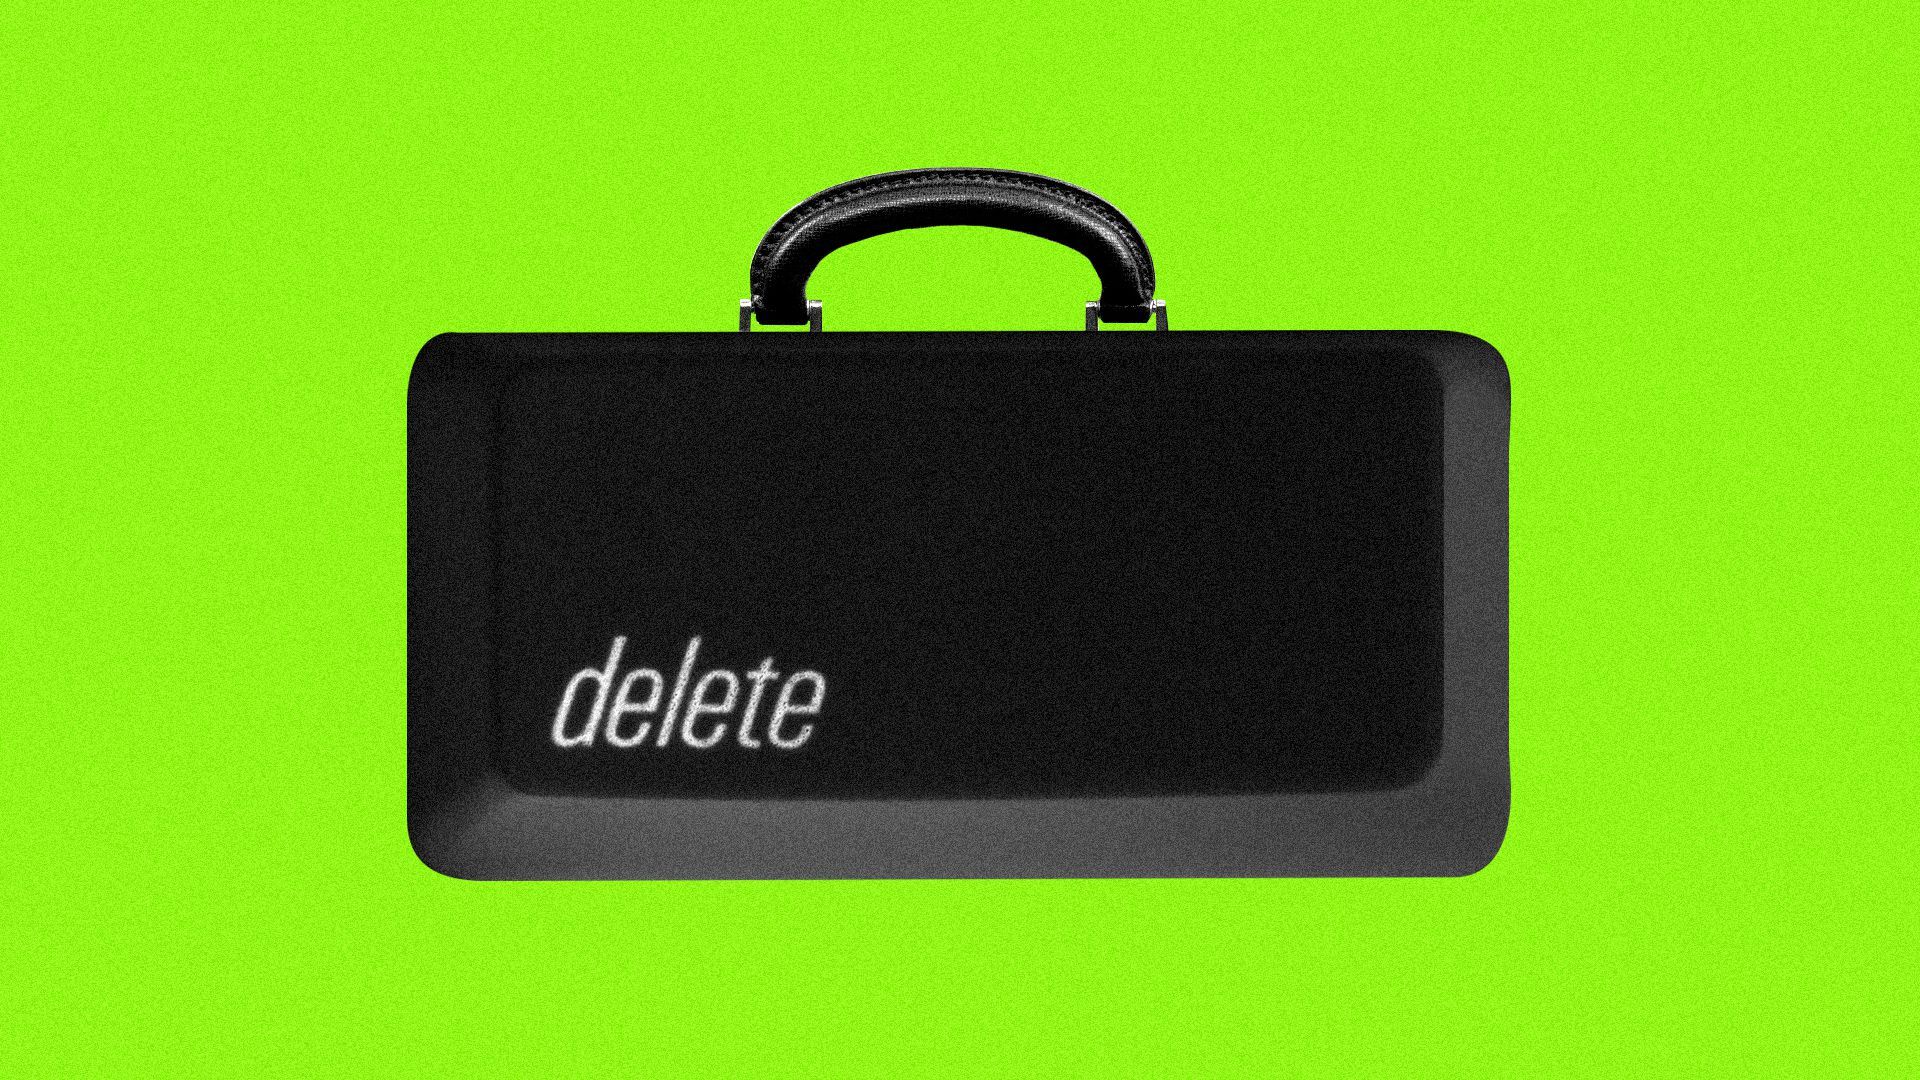 Illustration of a delete key fashioned as a briefcase. 